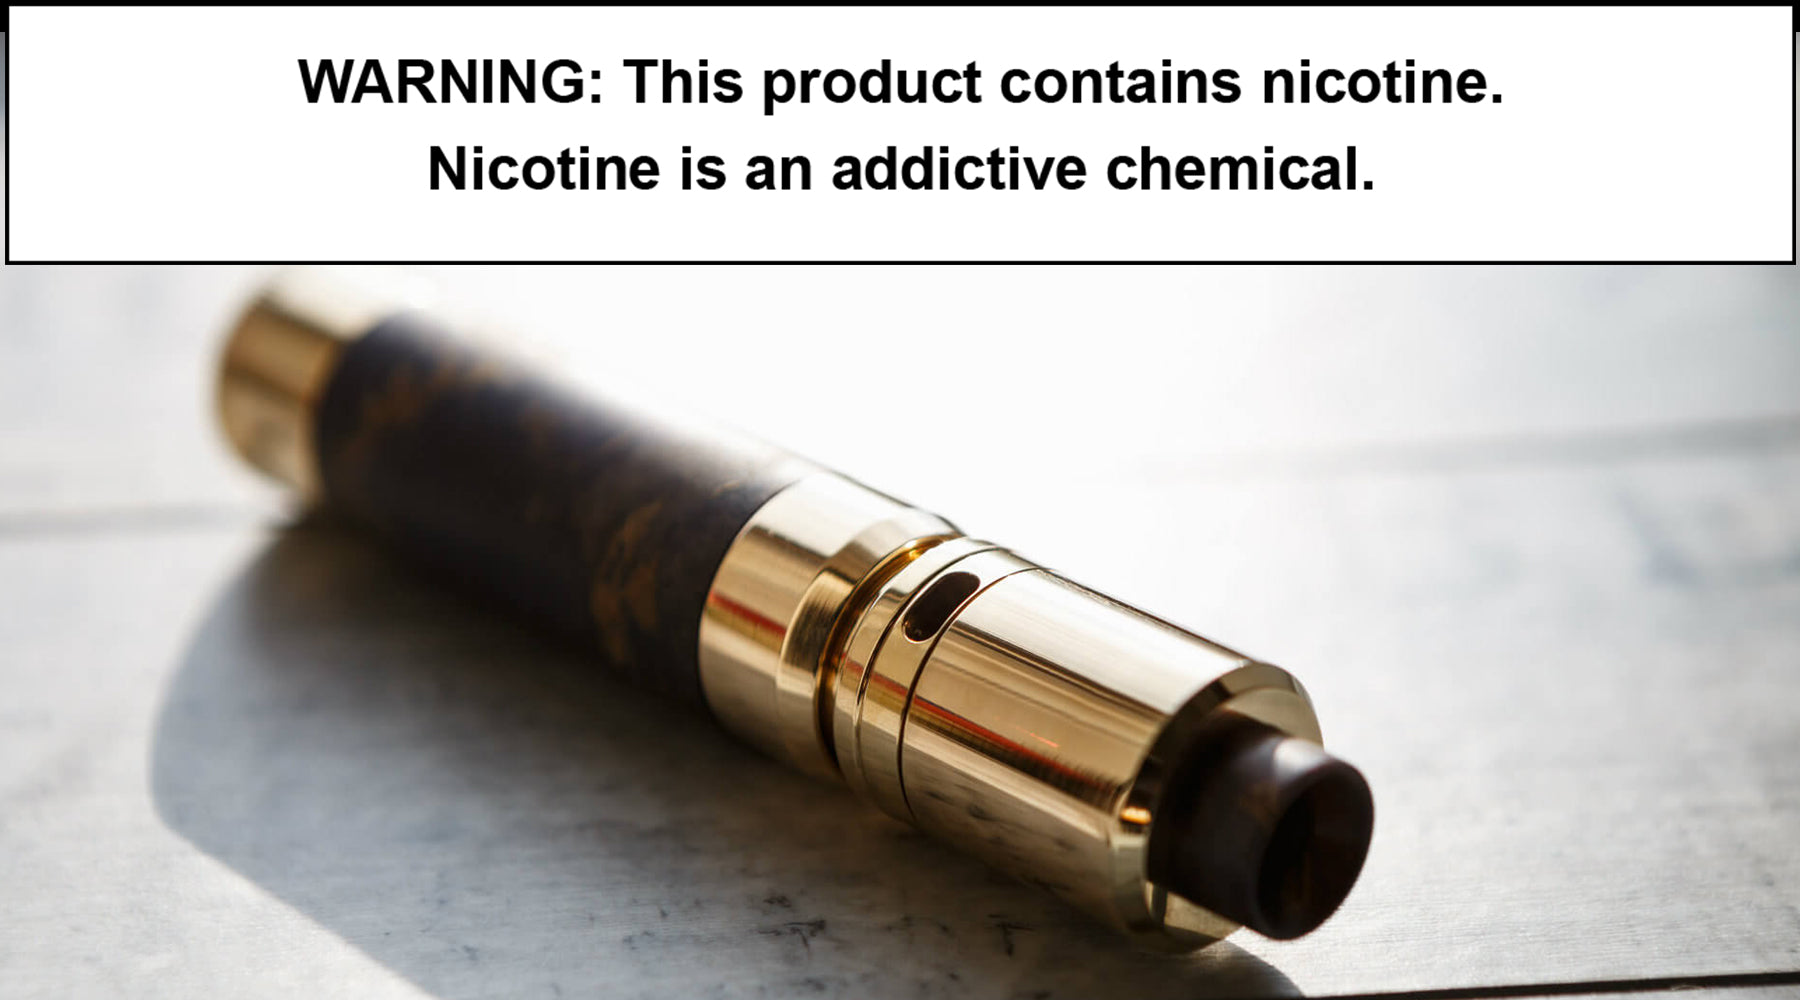 Are You Ready To Vape With Mechanical Mods?